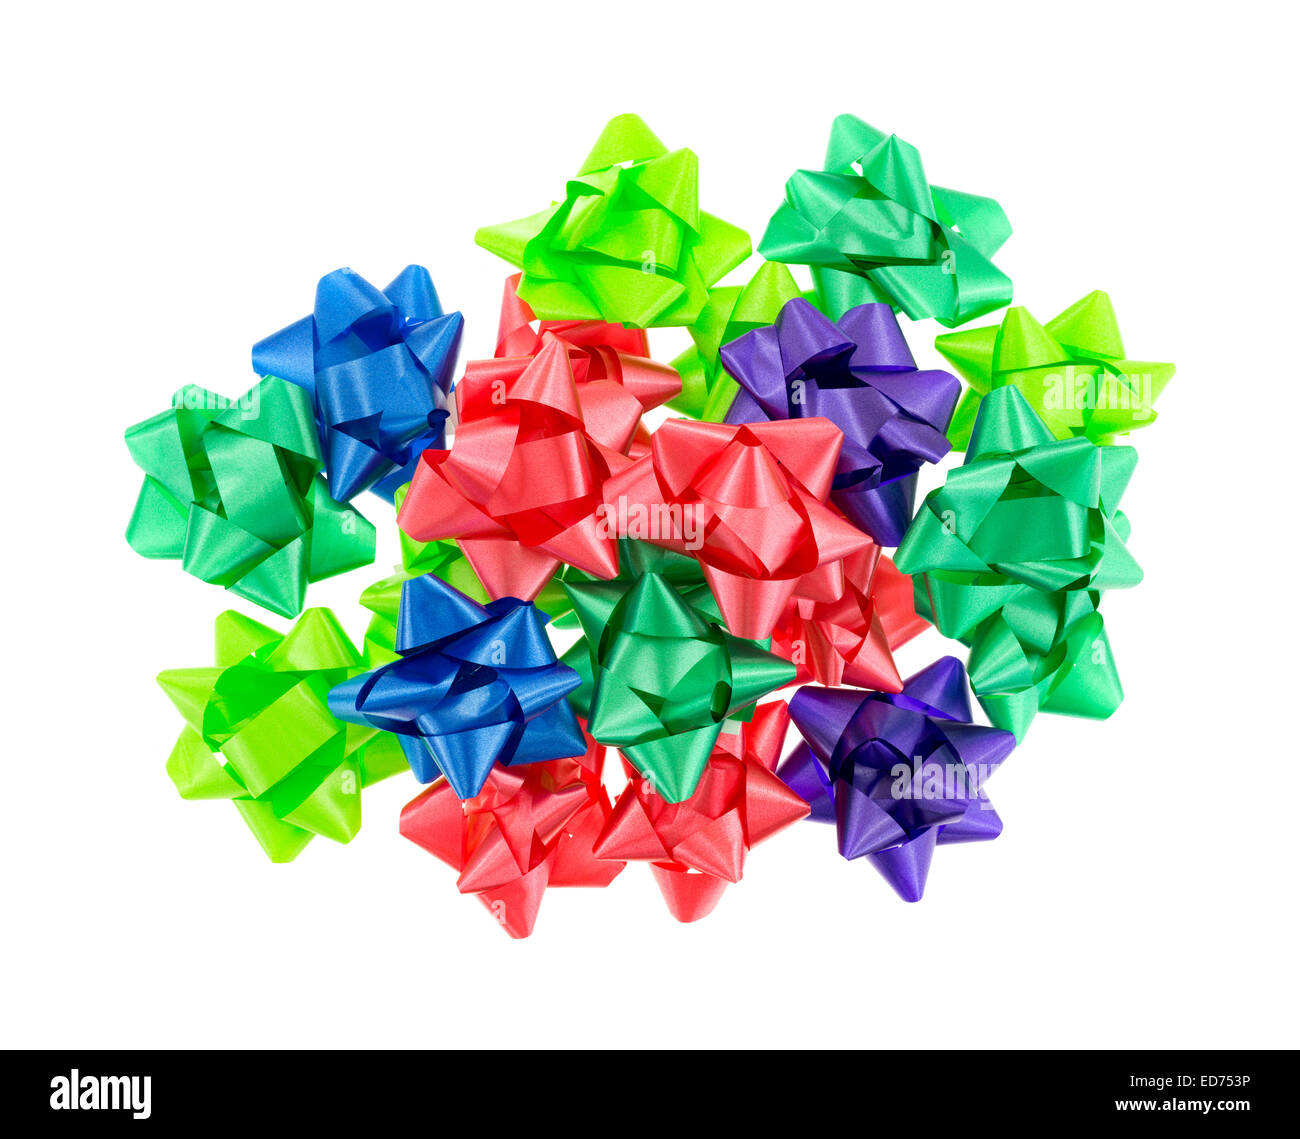 A group of multiple shades of Christmas bows on a white background. Stock Photo